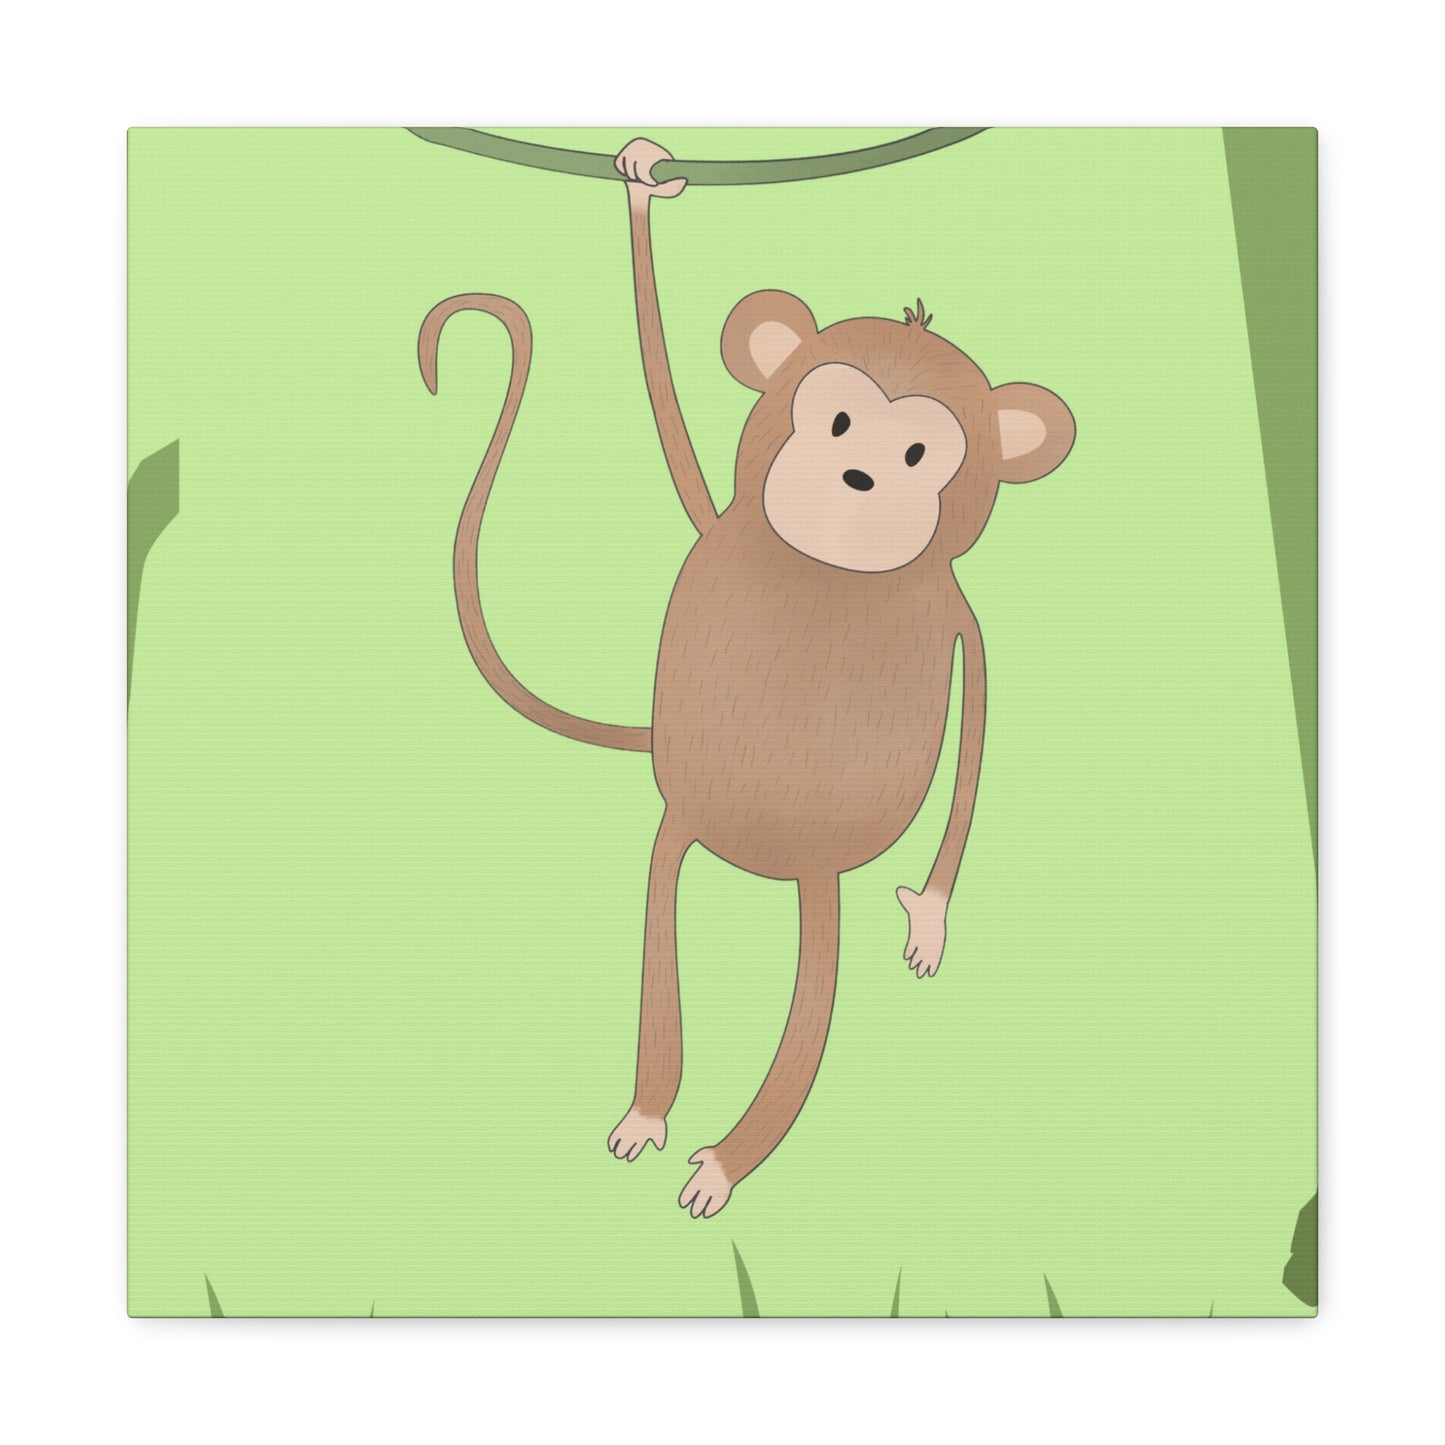 "Monkey Time" Wall Art - Weave Got Gifts - Unique Gifts You Won’t Find Anywhere Else!